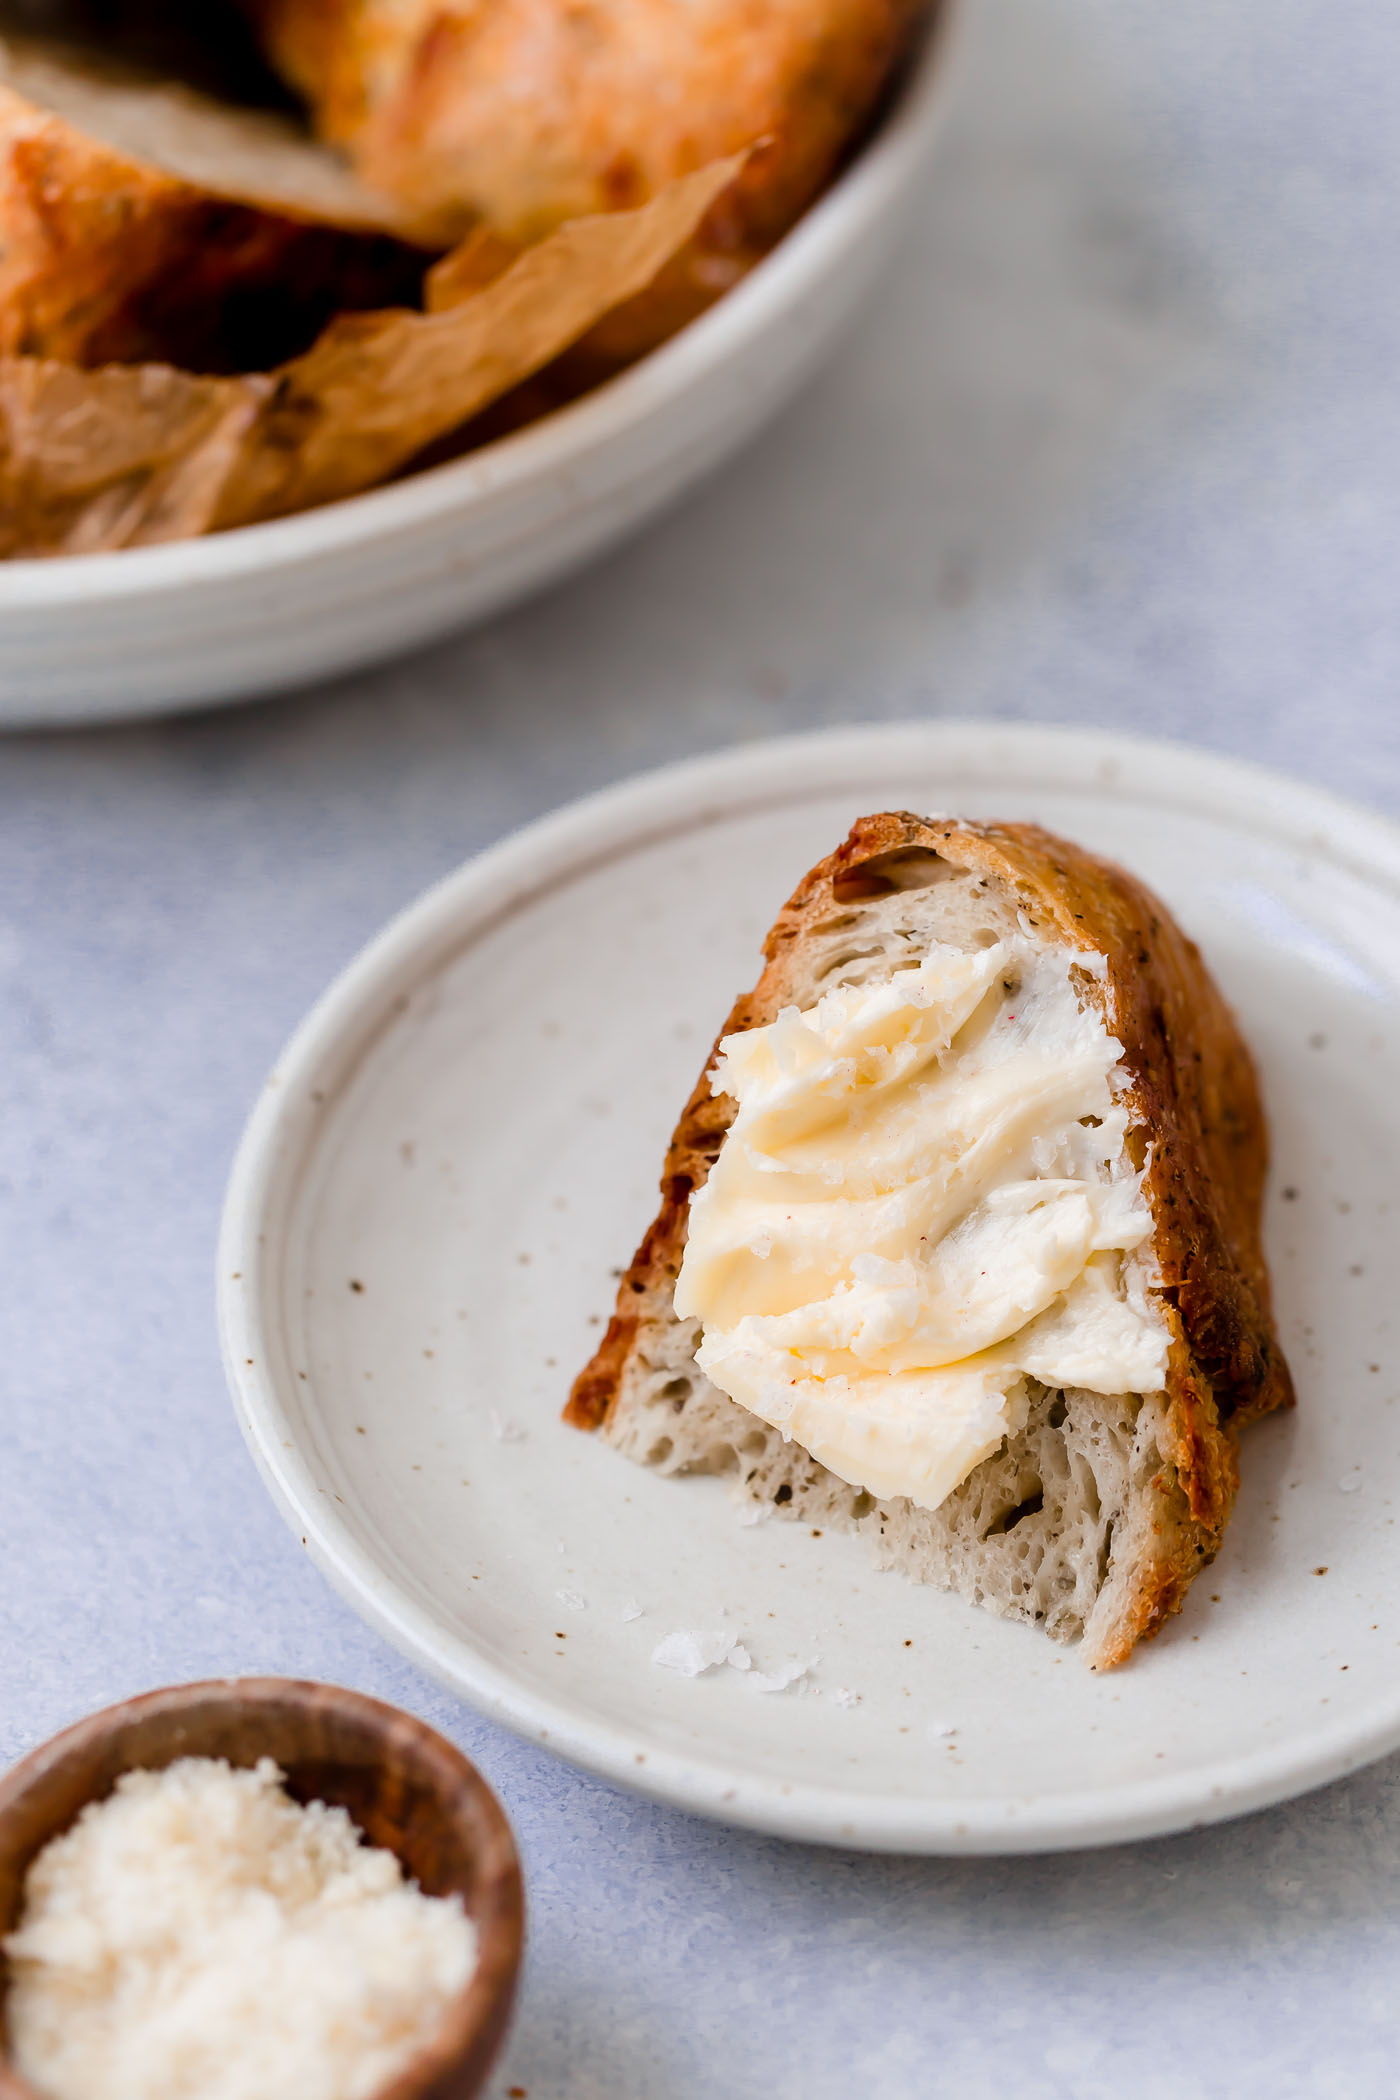 italian herb asiago cheese no-knead bread, prepped in less than 10 minutes active time & baked to crusty, golden perfection in a dutch oven! made with only 5 pantry ingredients, this homemade bread couldn’t be easier to throw together, & is perfect to serve with any of your favorite soups for a totally cozy dinner this winter! #playswellwithbutter #italianherbbread #asiagocheesebread #nokneadbread #nokneadbreaddutchoven #nokneadbreadvariations #easybreadrecipes #crustybread #homemadebread